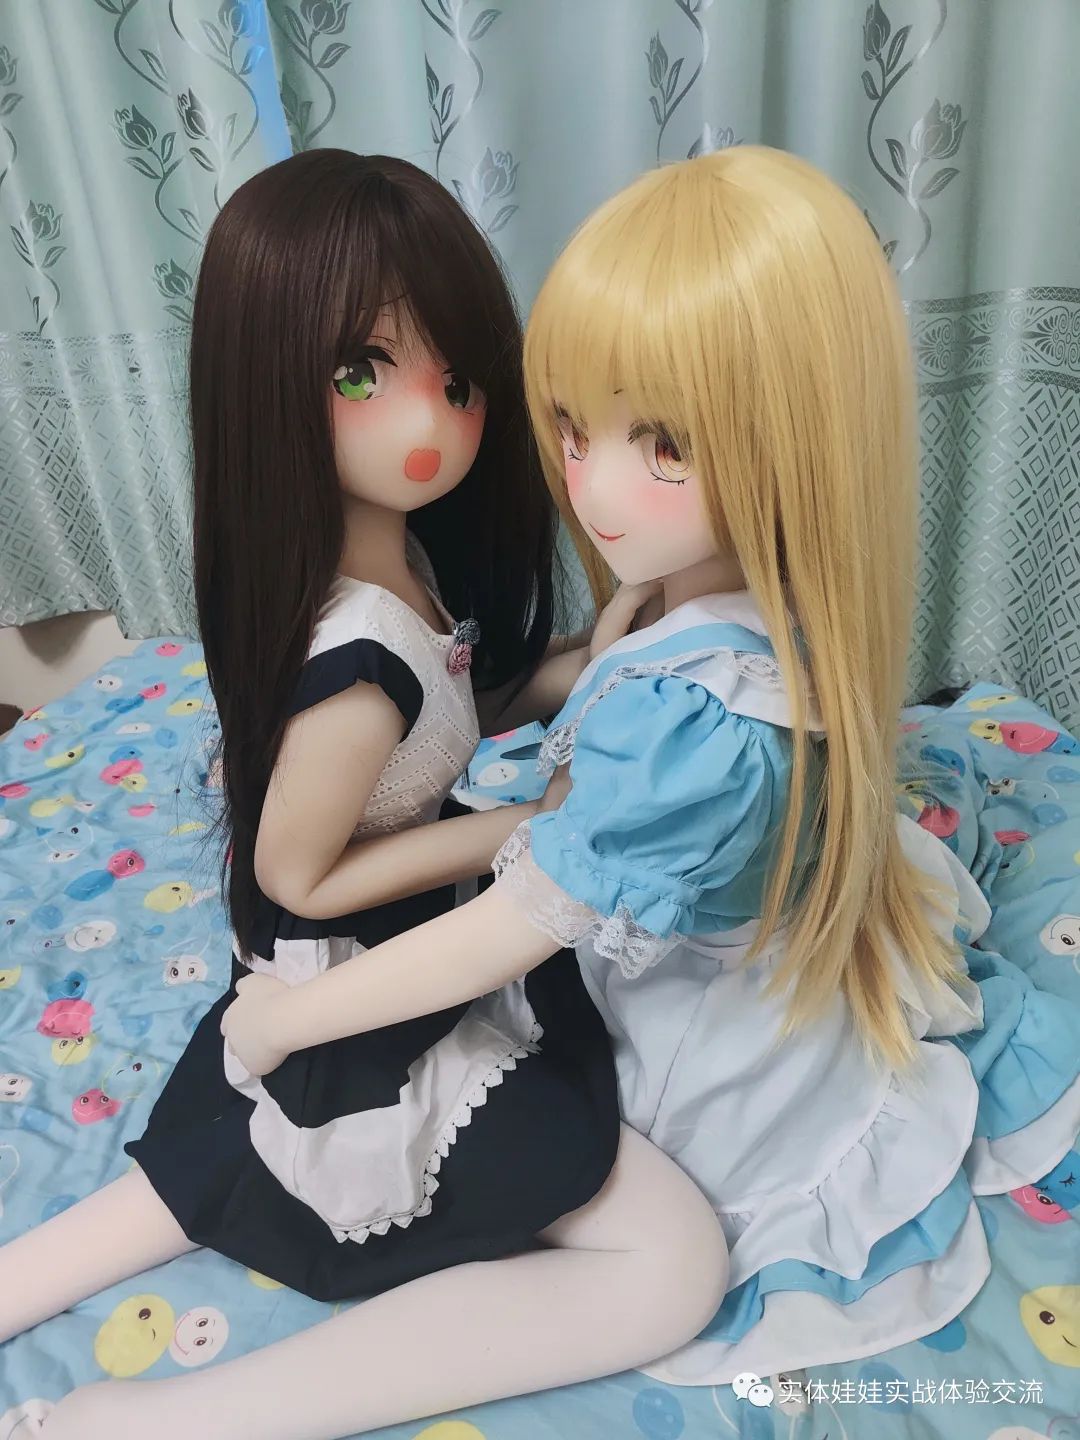 To remove the color after dyeing the TPE silicone doll, these methods can be used